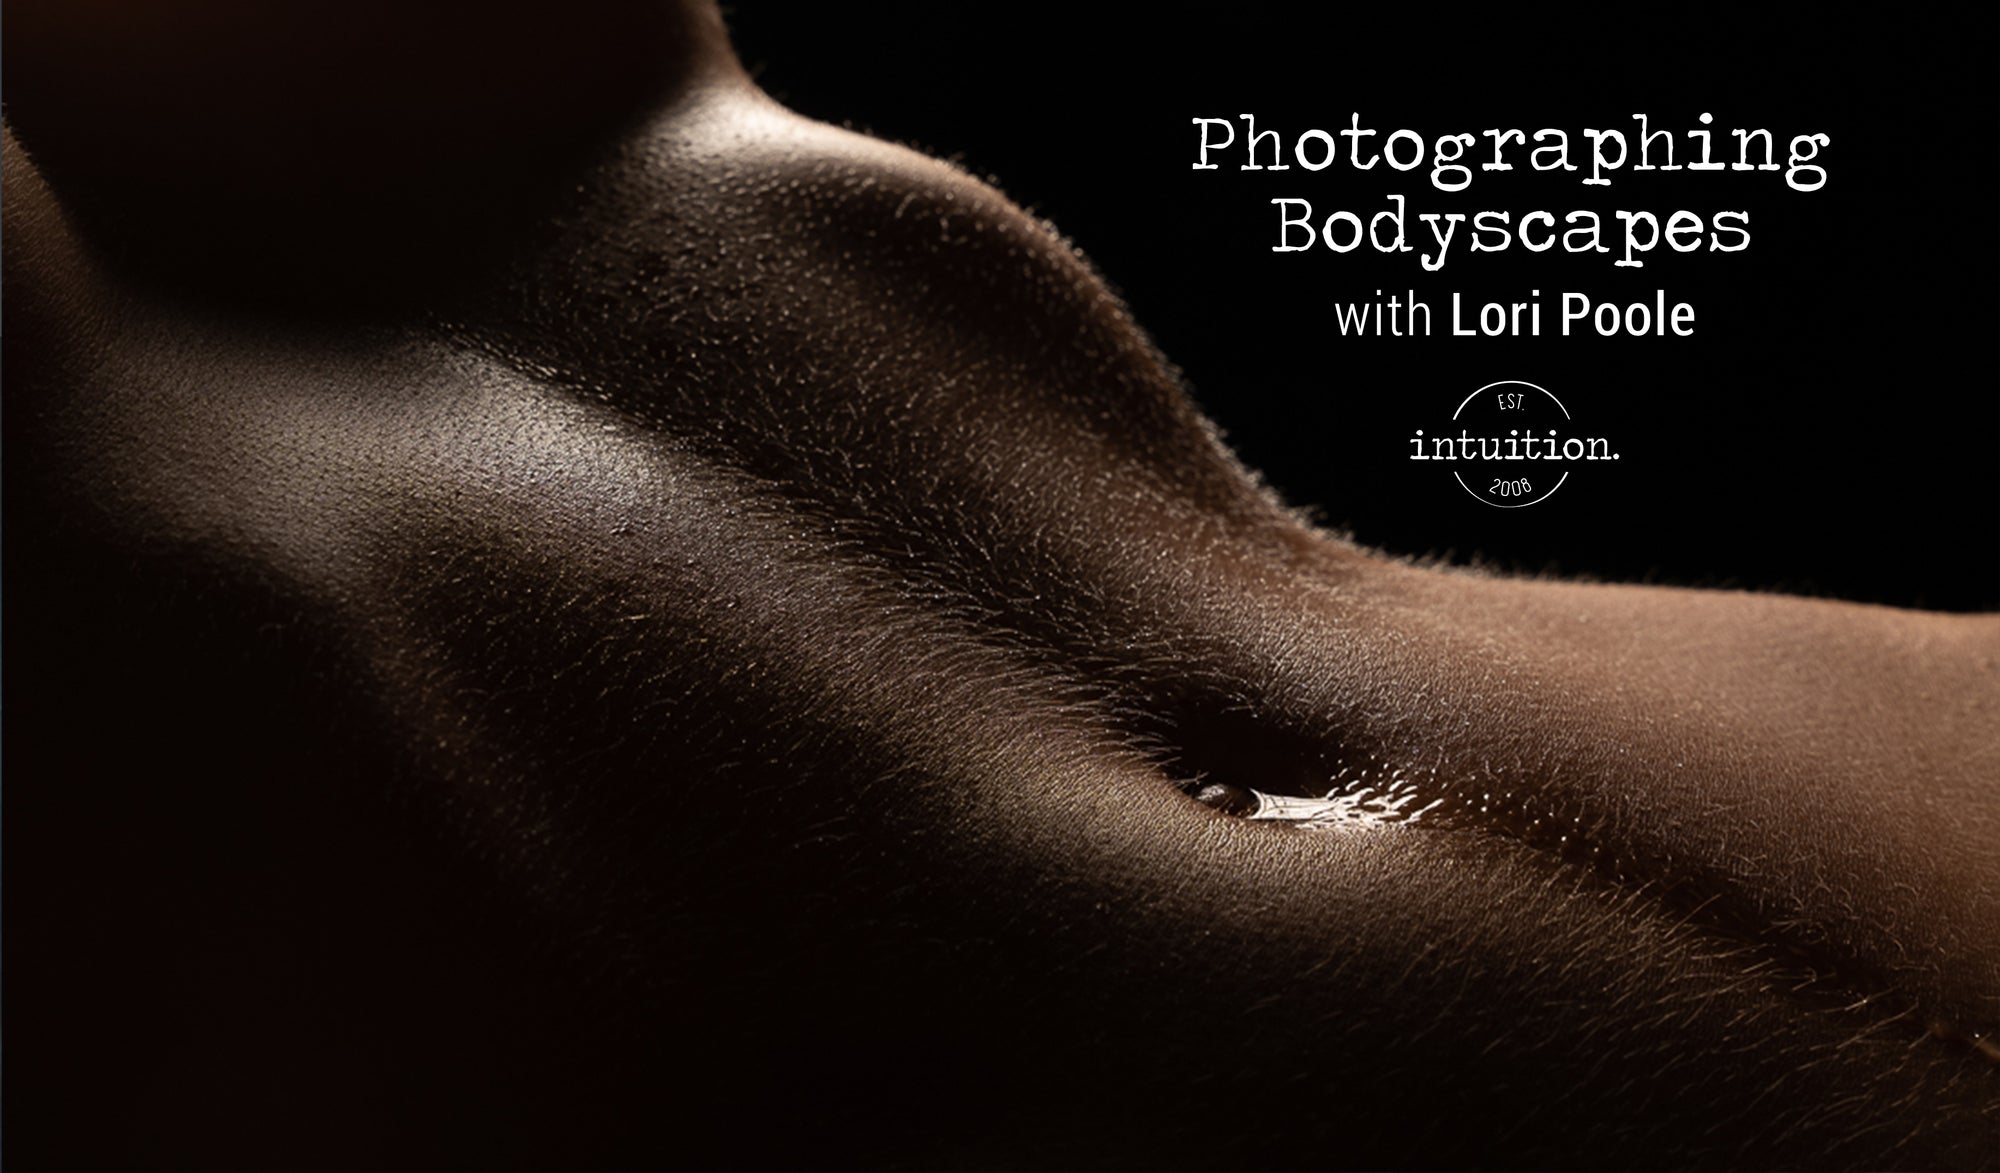 Photographing Bodyscapes with Lori Poole